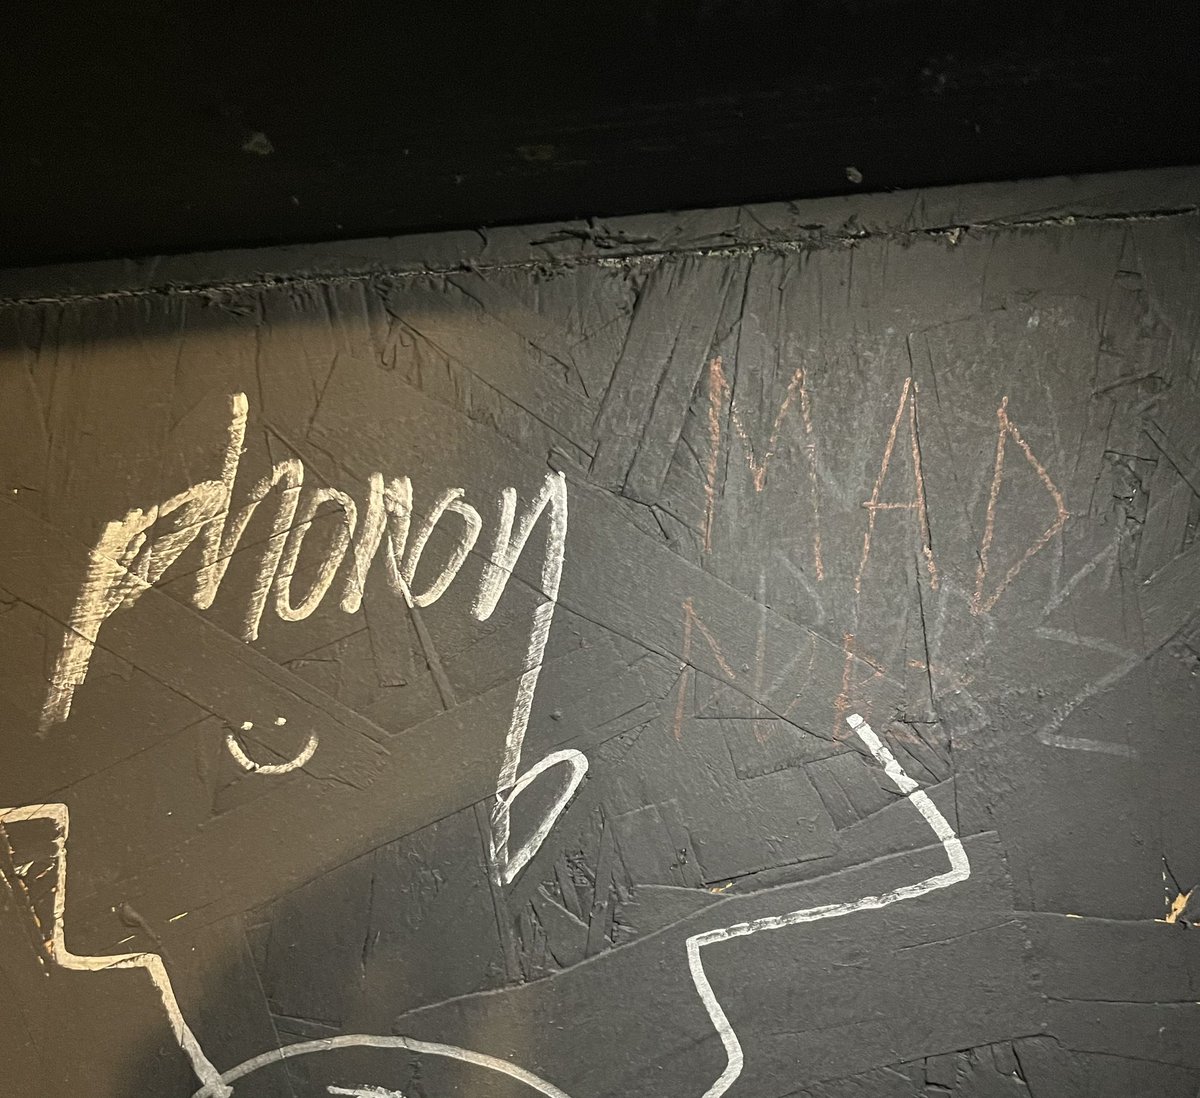 I couldn’t find a white pen but any true fan will realise being able to sign next to this name is probably one of the most important moments of my life. I love you @phononmusic